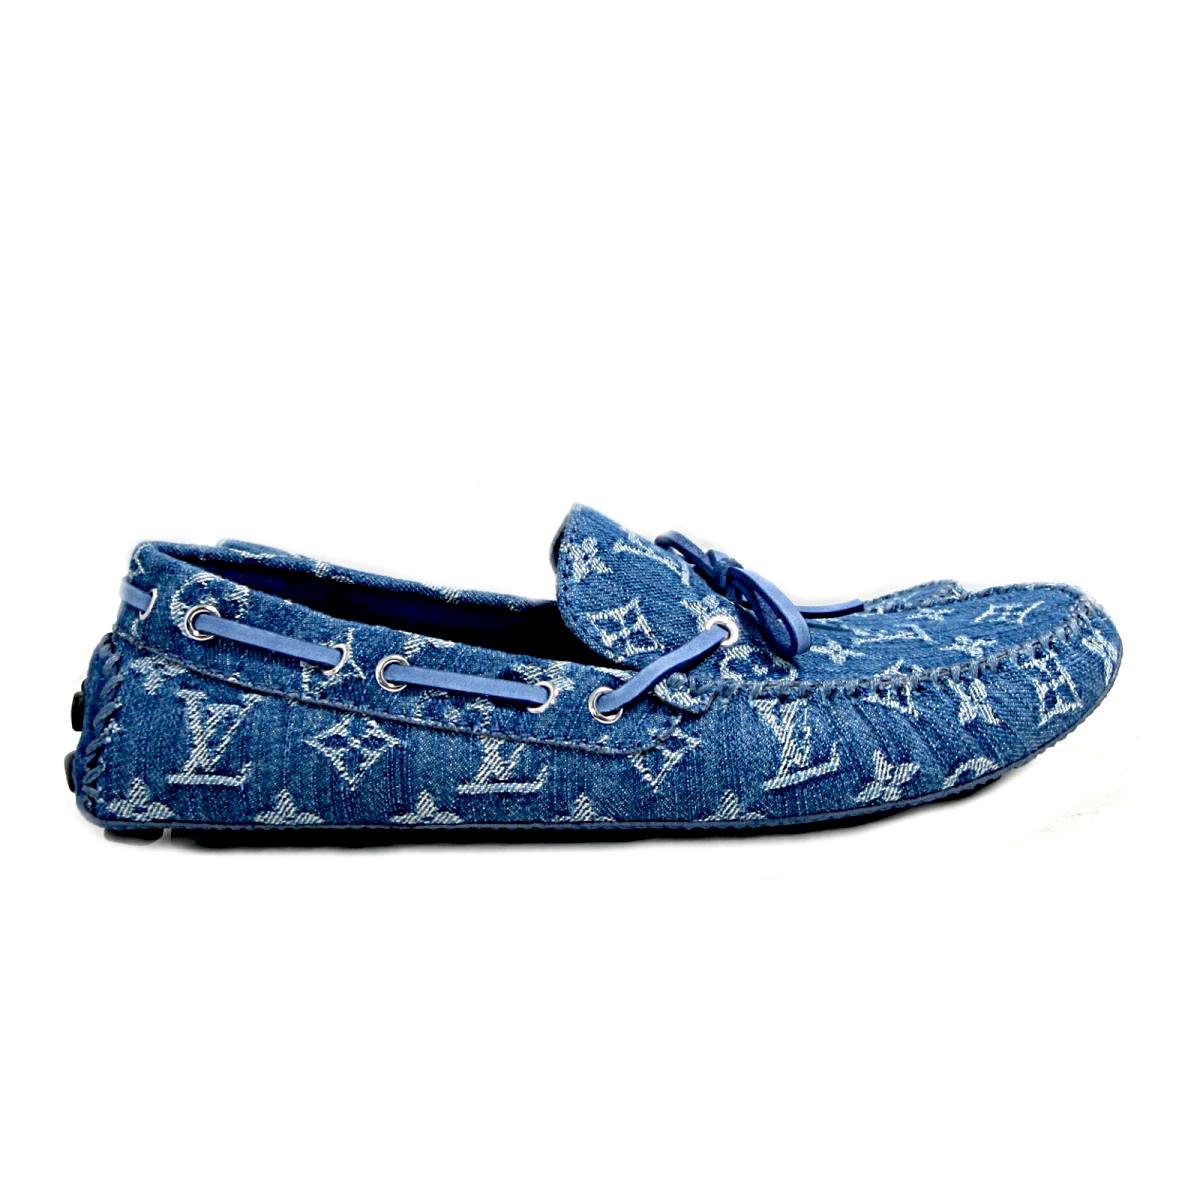 louis vuitton loafers